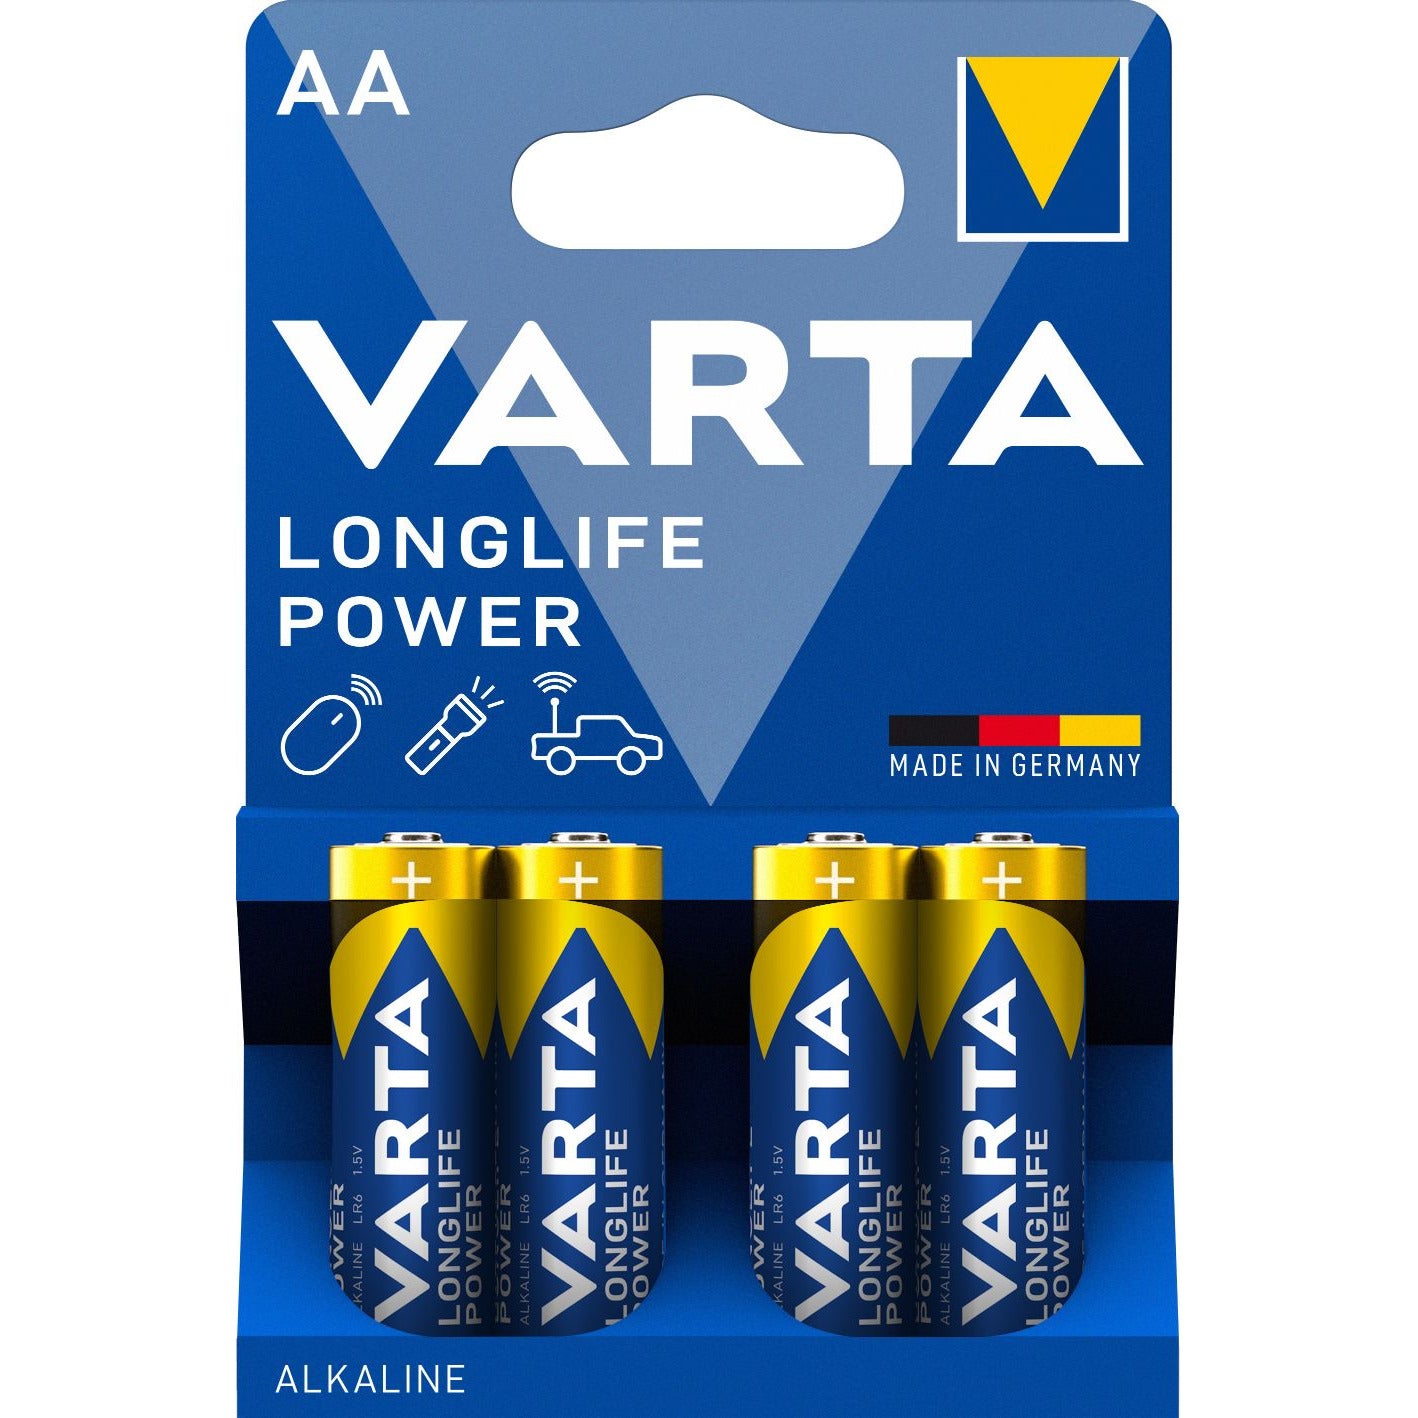 LONGLIFE POWER BATTERIES AA 4 PACK